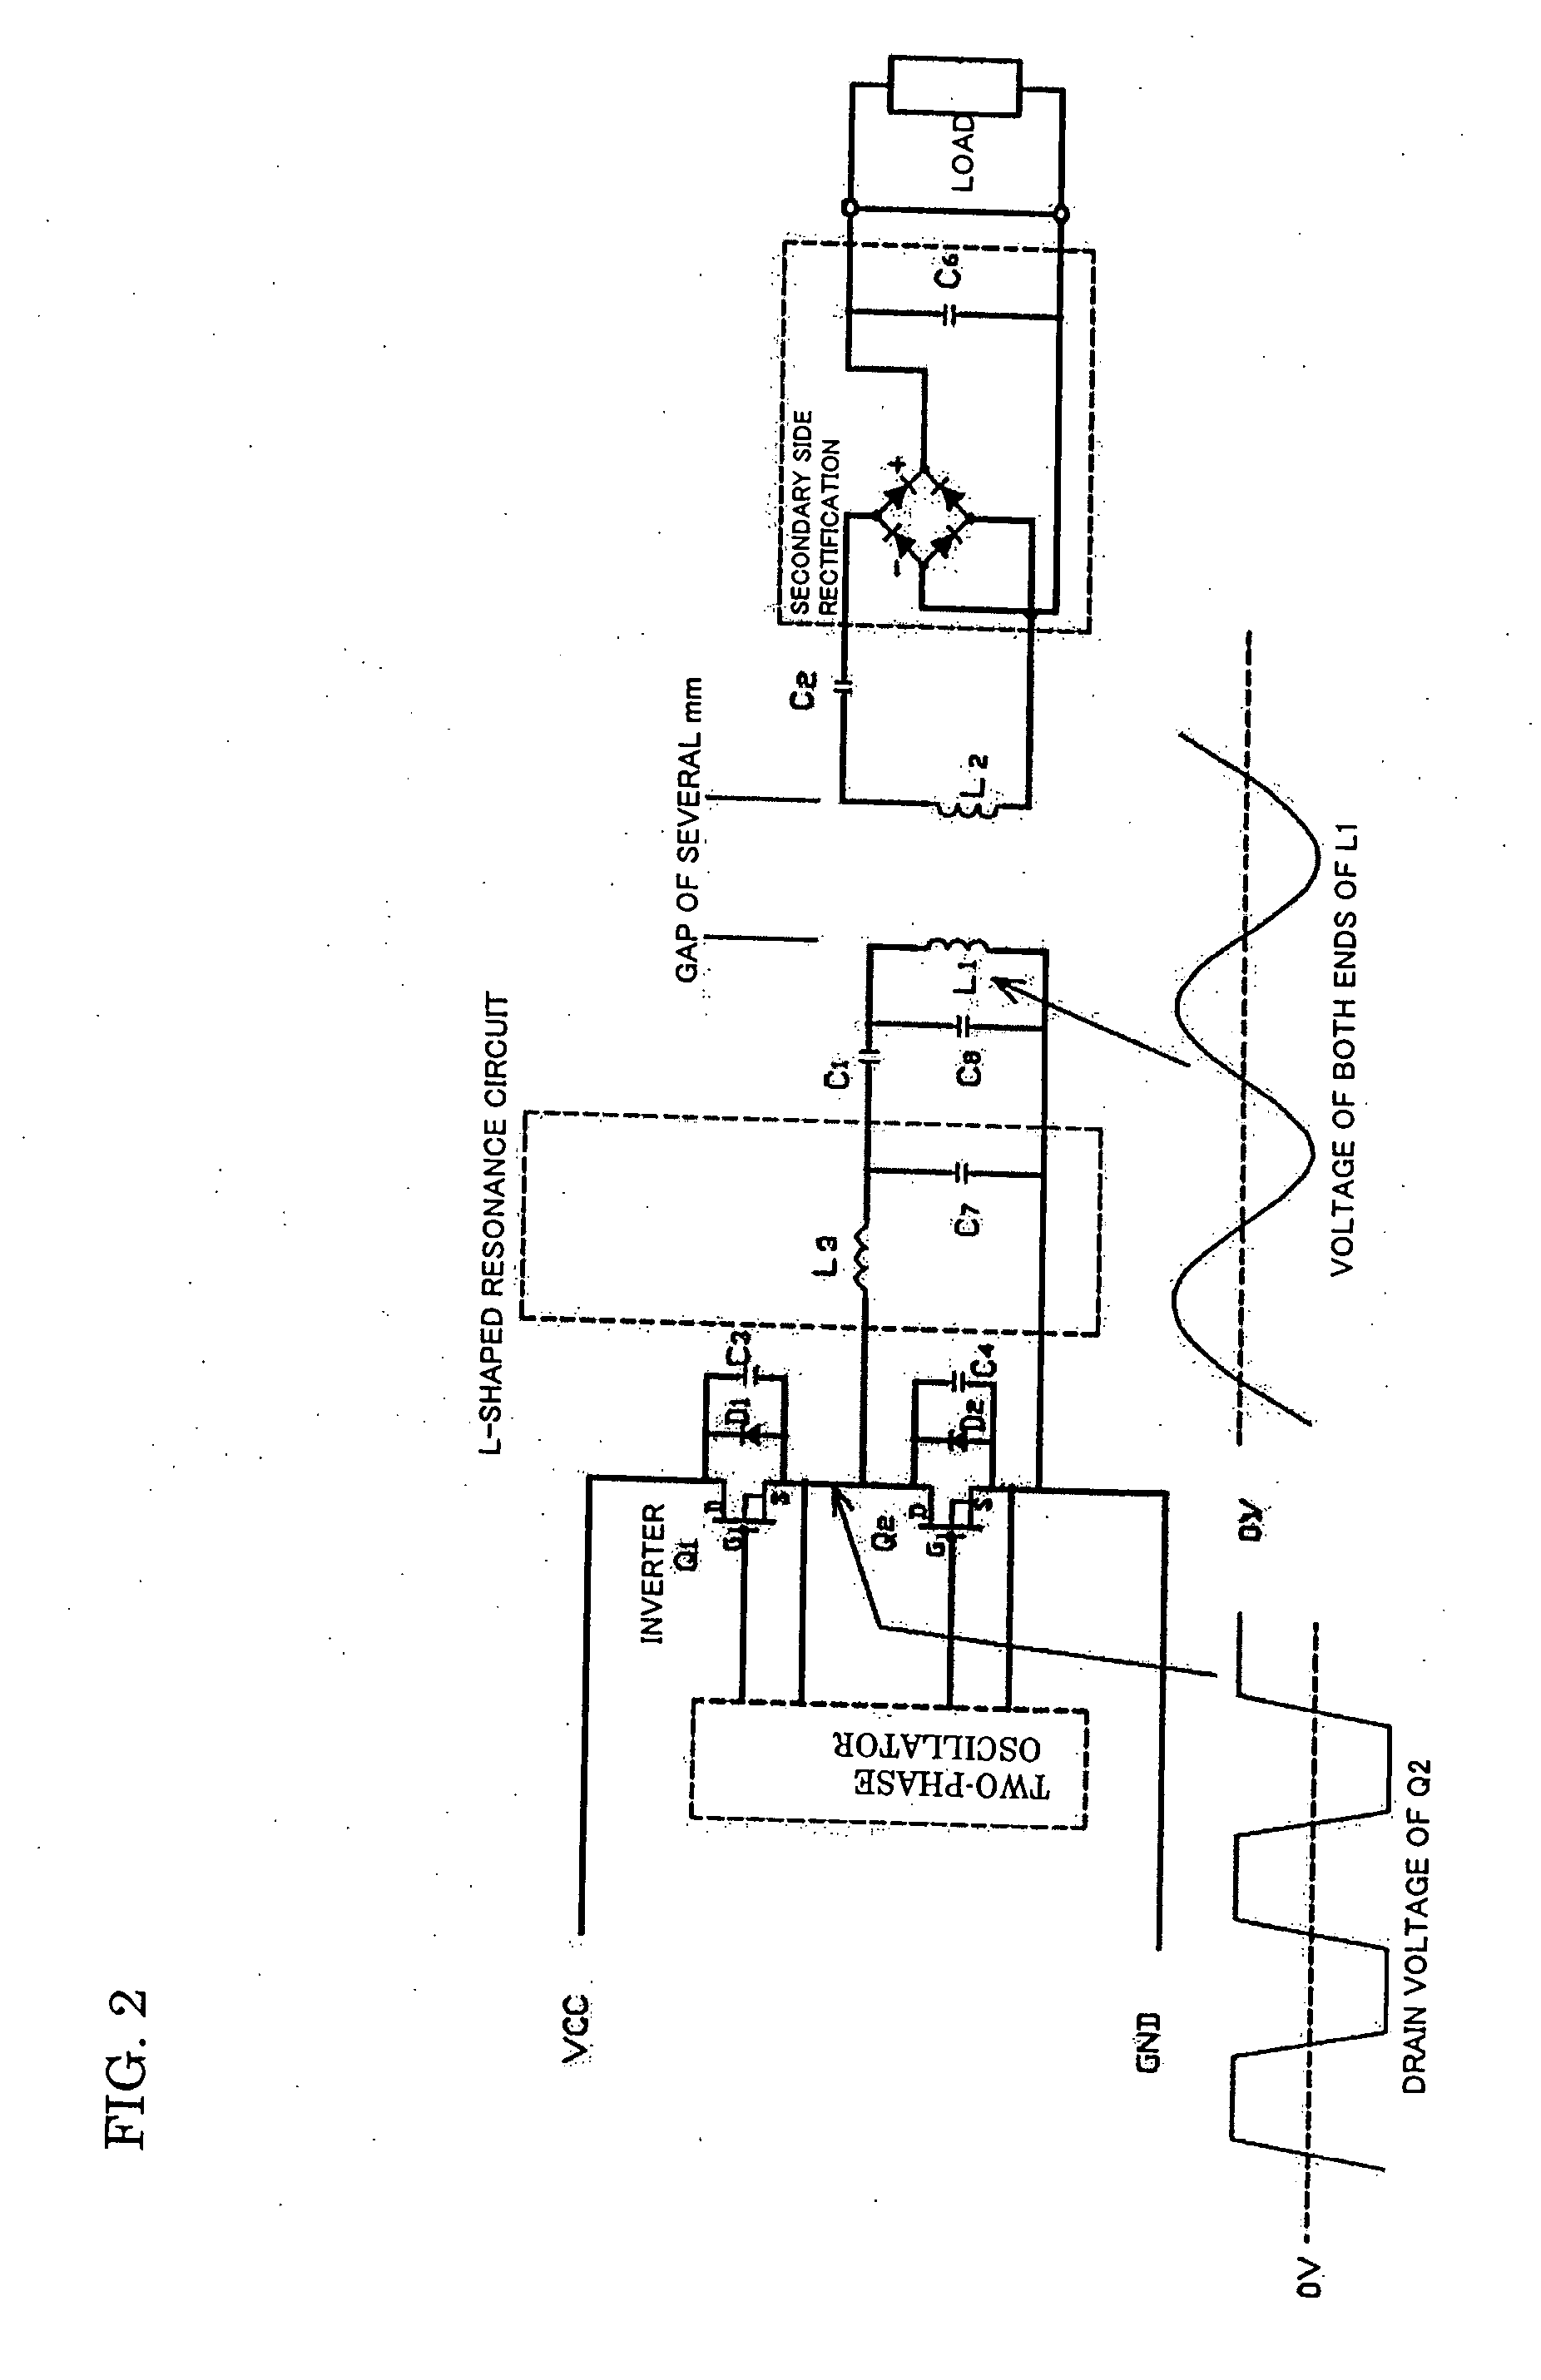 Non-Contact Power Transmission Device